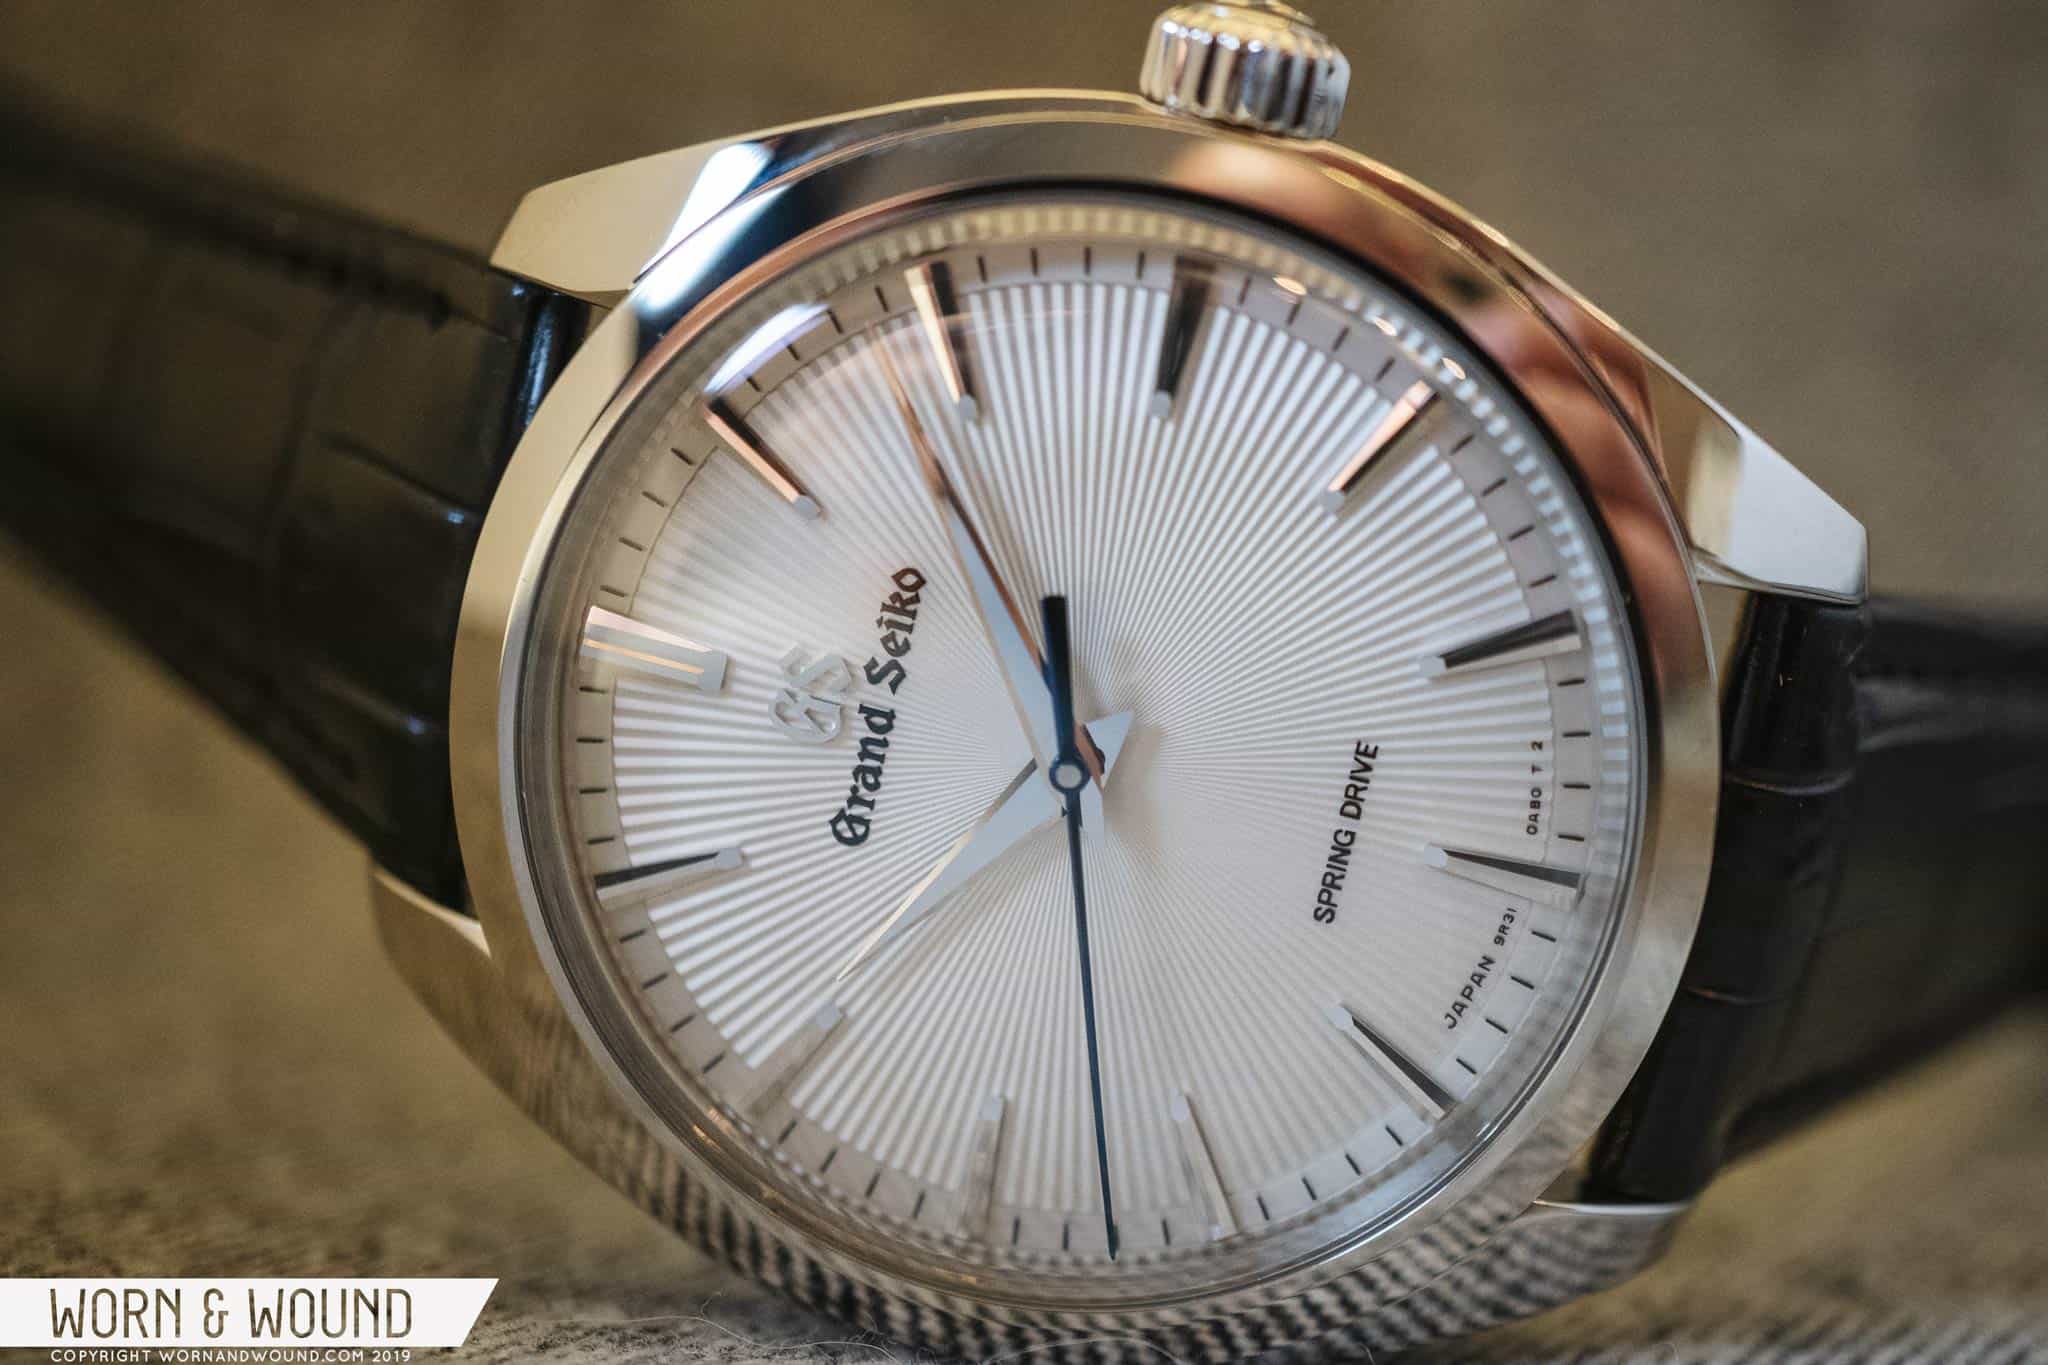 Baselworld 2019: First Look at the Grand Seiko Elegance SBGY003